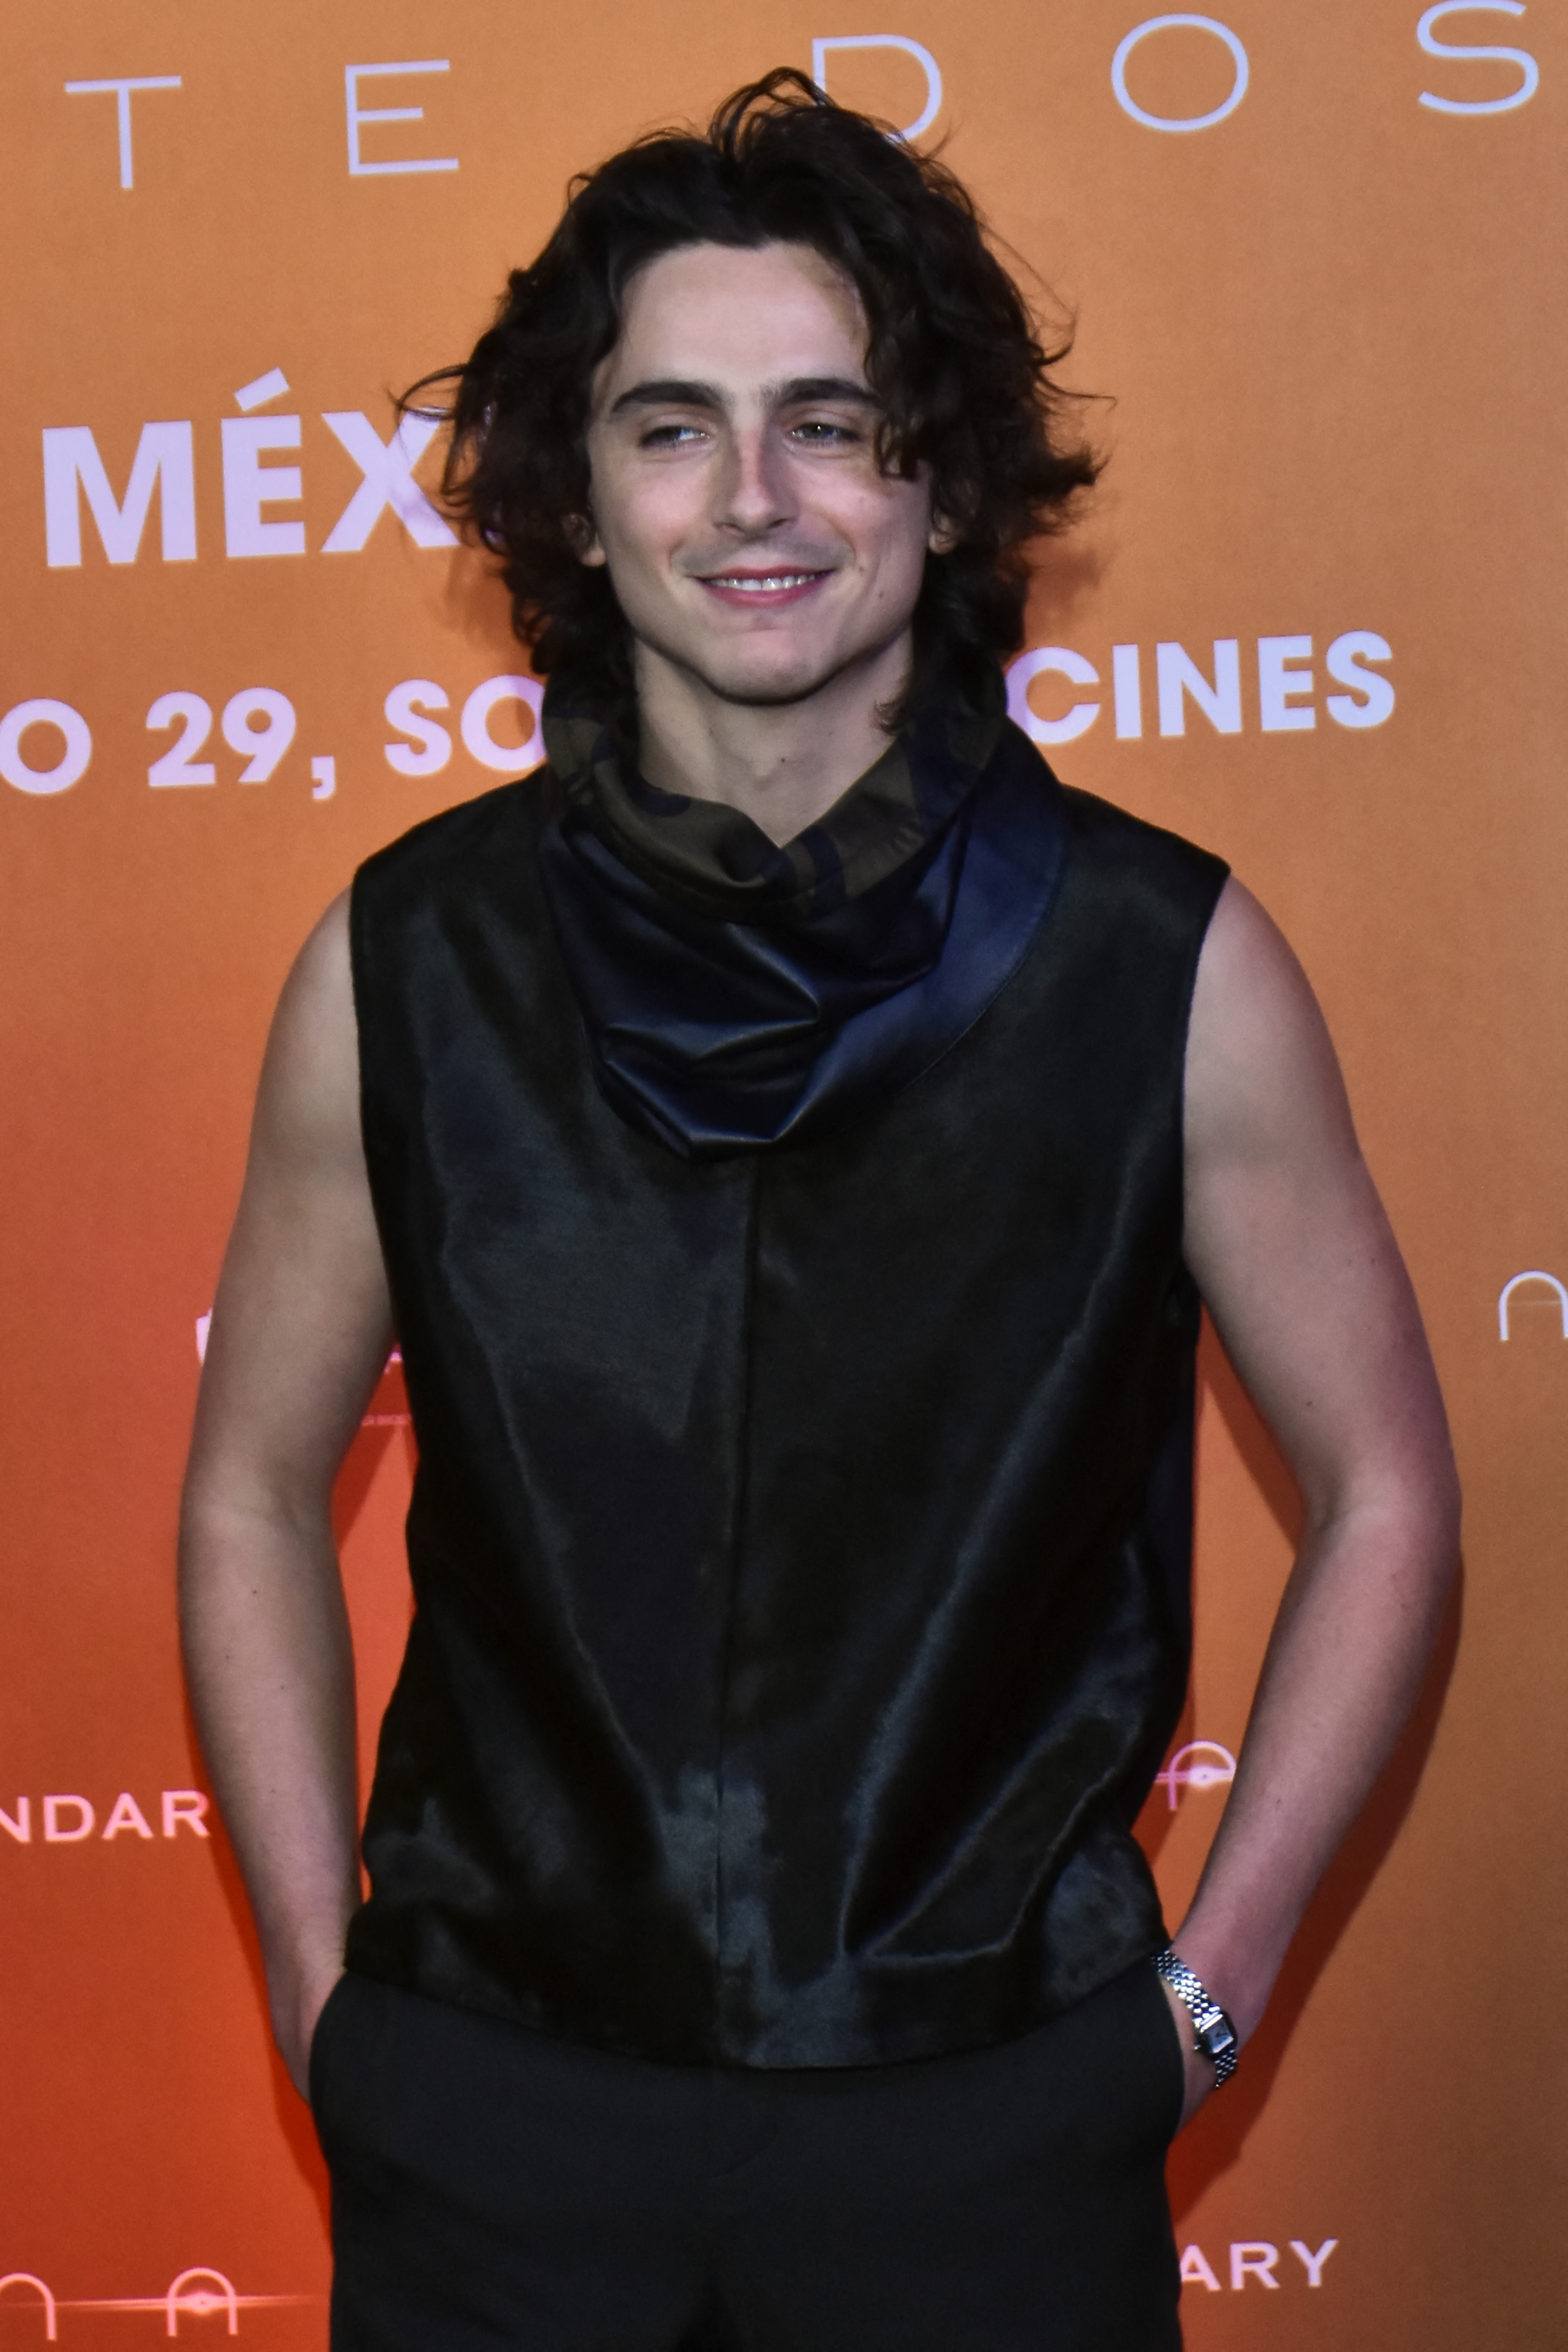 Timothee raised eyebrows when he flew to Mexico City without the reality star